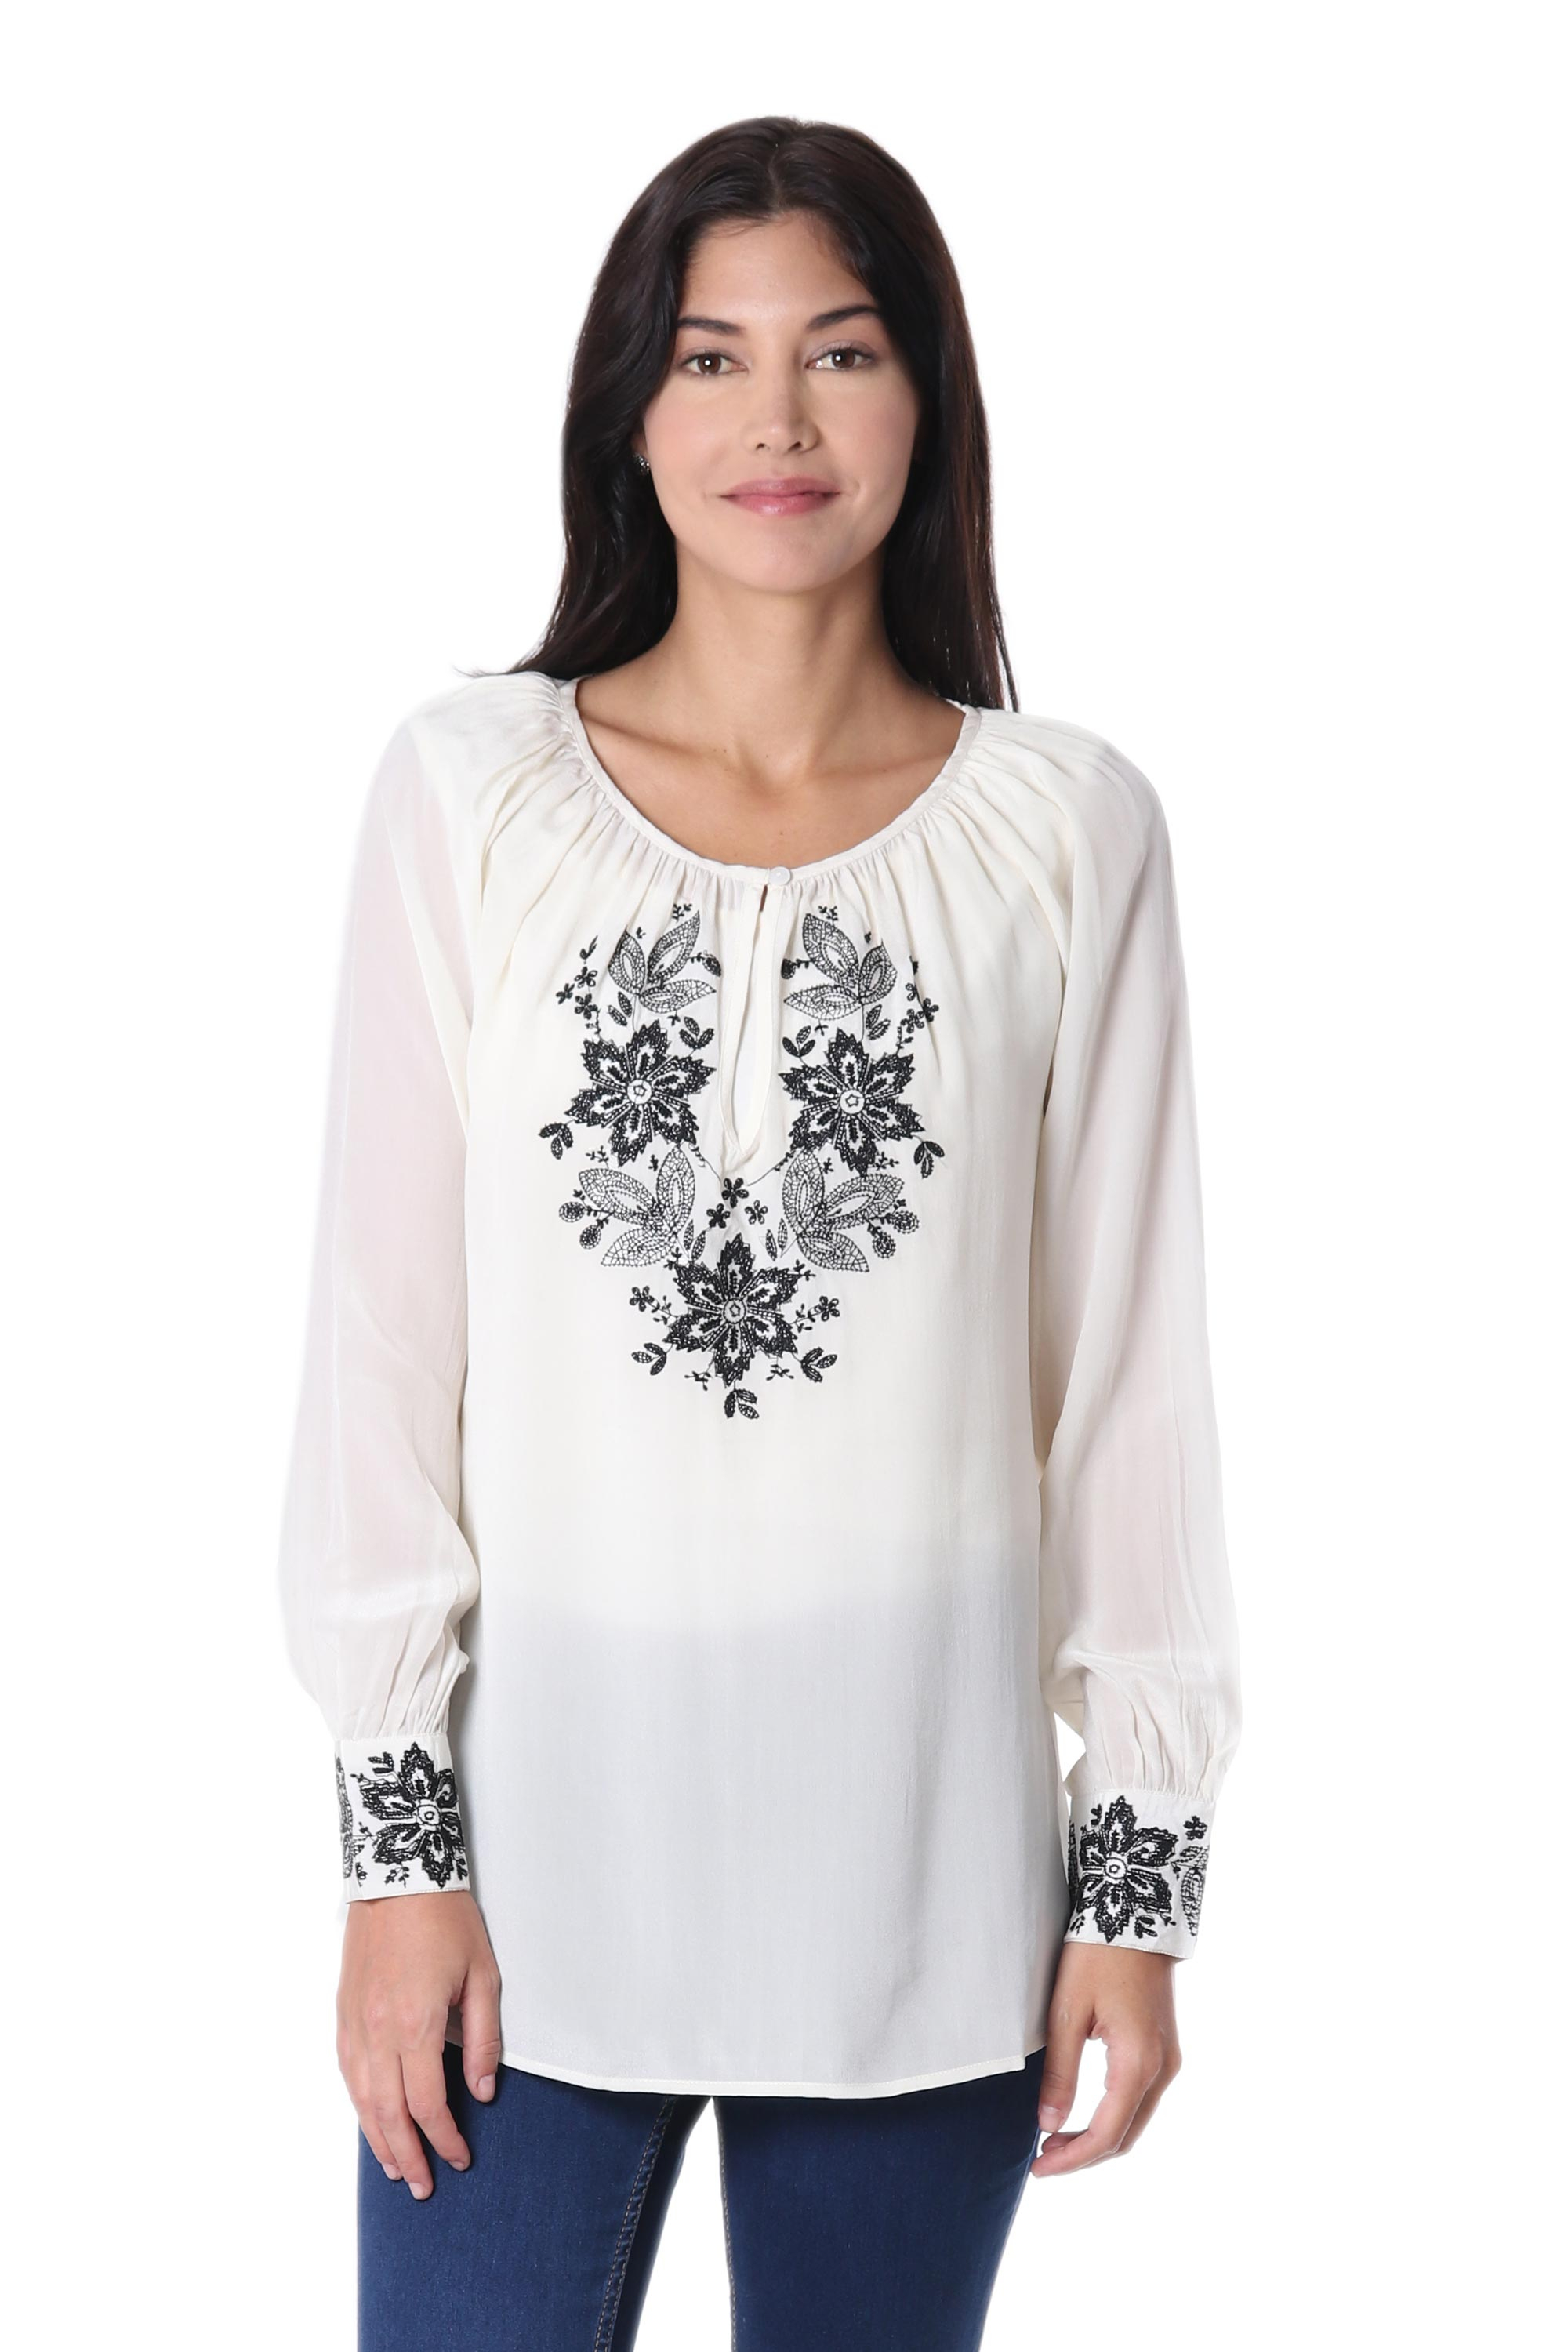 Ivory Silk Long-Sleeved Blouse with Black Floral Embroidery - Moonlight ...